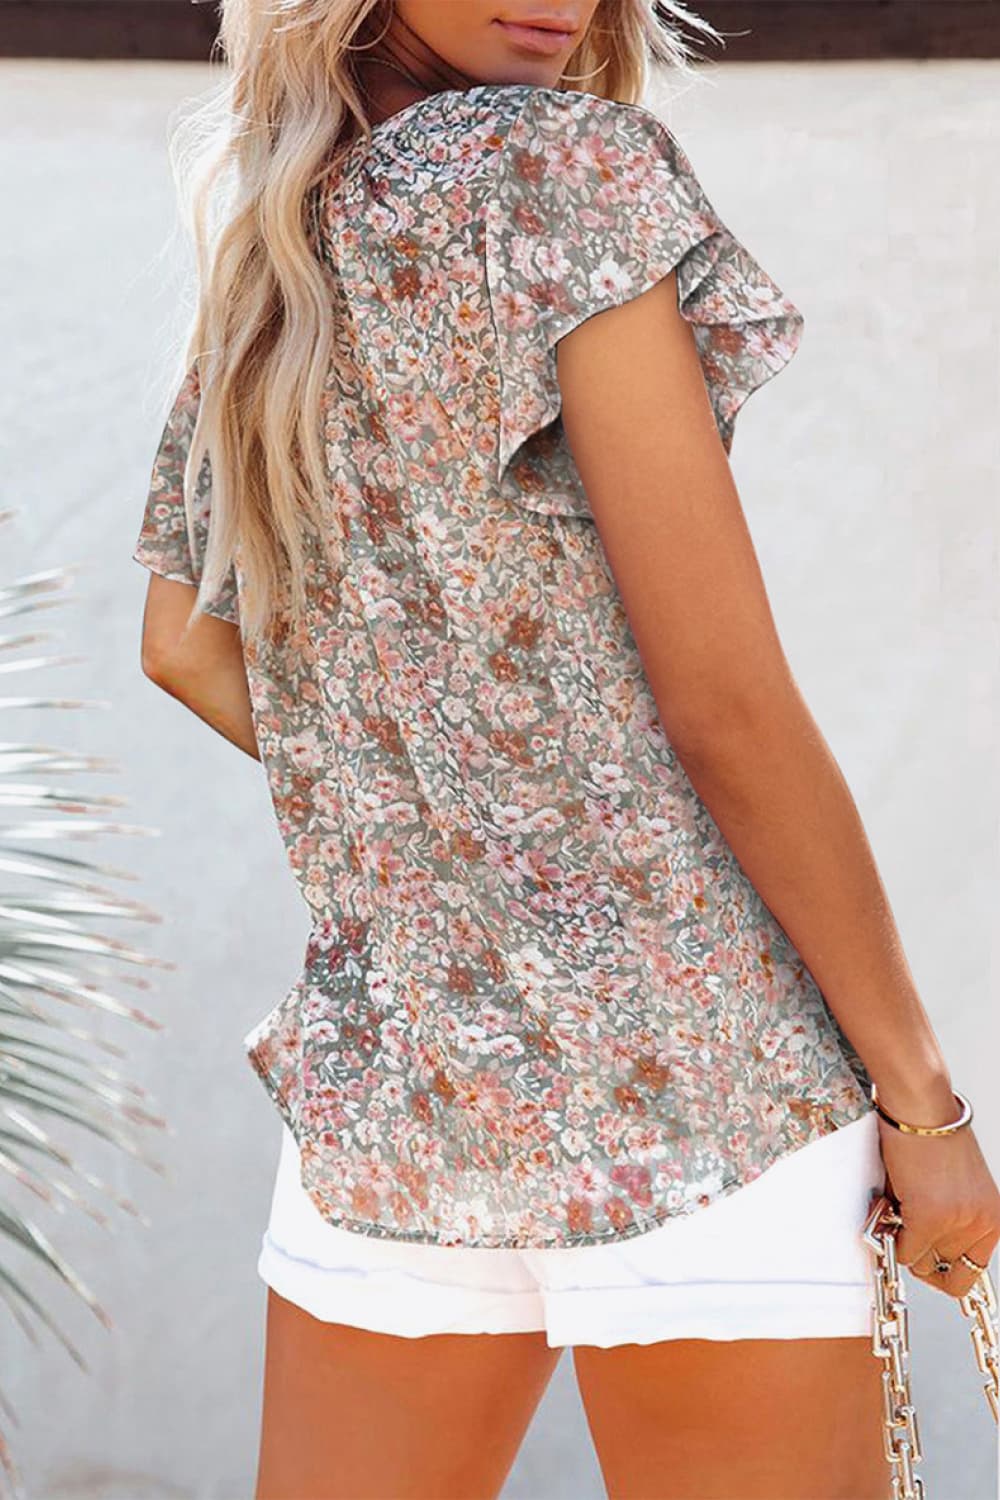 Chic Floral Flutter Sleeve Shirt ( 8 Colors / S - 2X )